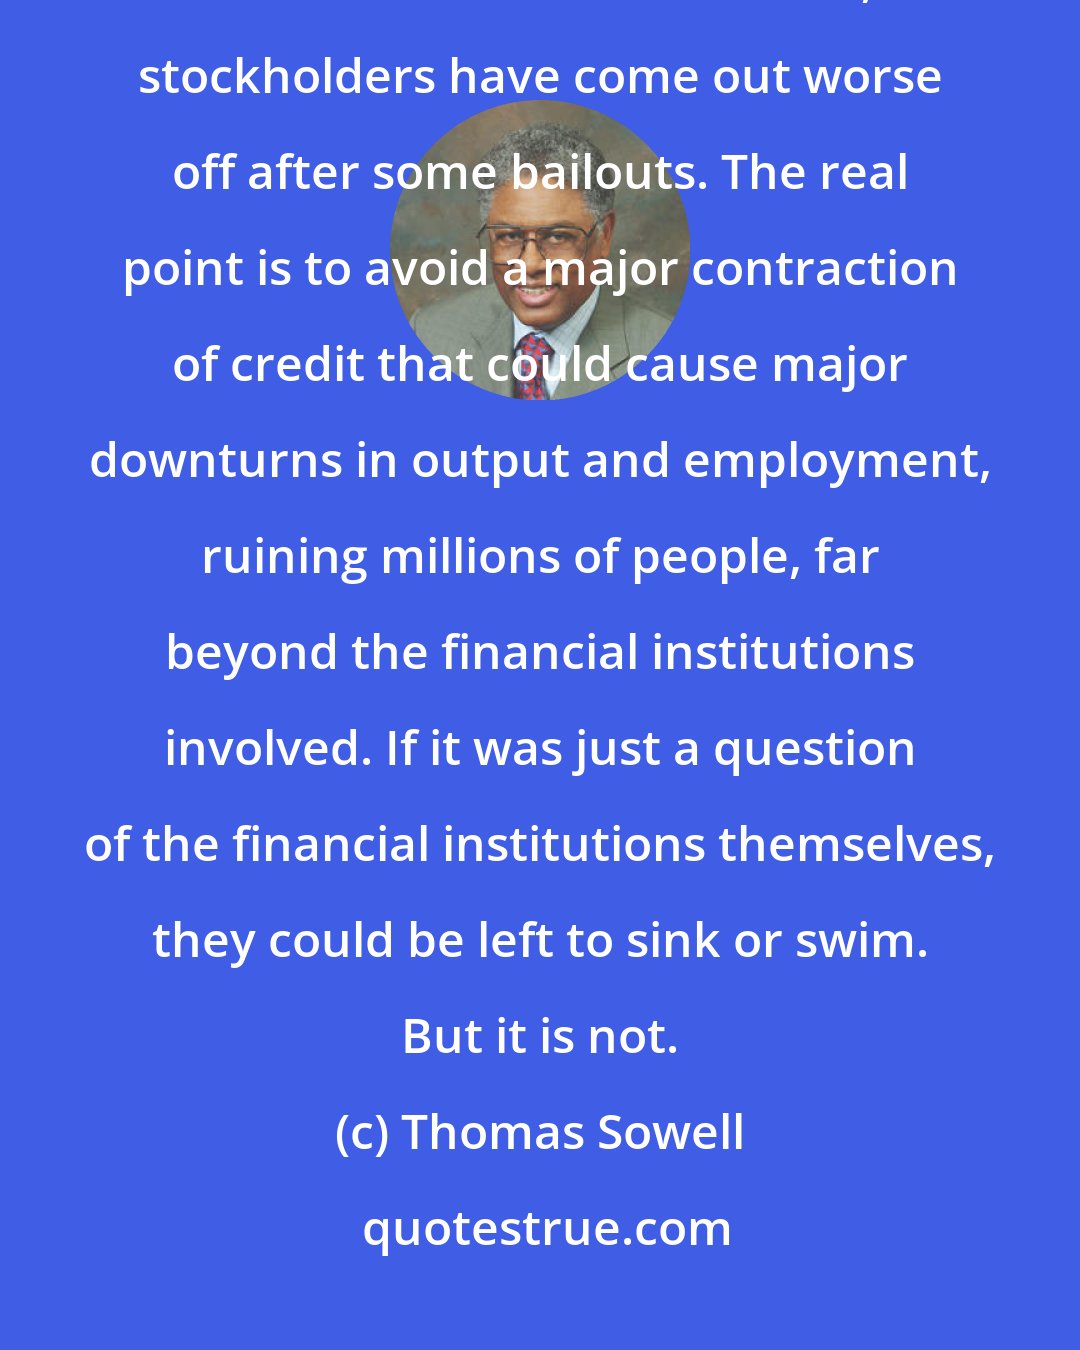 Thomas Sowell: Financial institutions are not being bailed out as a favor to them or their stockholders. In fact, stockholders have come out worse off after some bailouts. The real point is to avoid a major contraction of credit that could cause major downturns in output and employment, ruining millions of people, far beyond the financial institutions involved. If it was just a question of the financial institutions themselves, they could be left to sink or swim. But it is not.